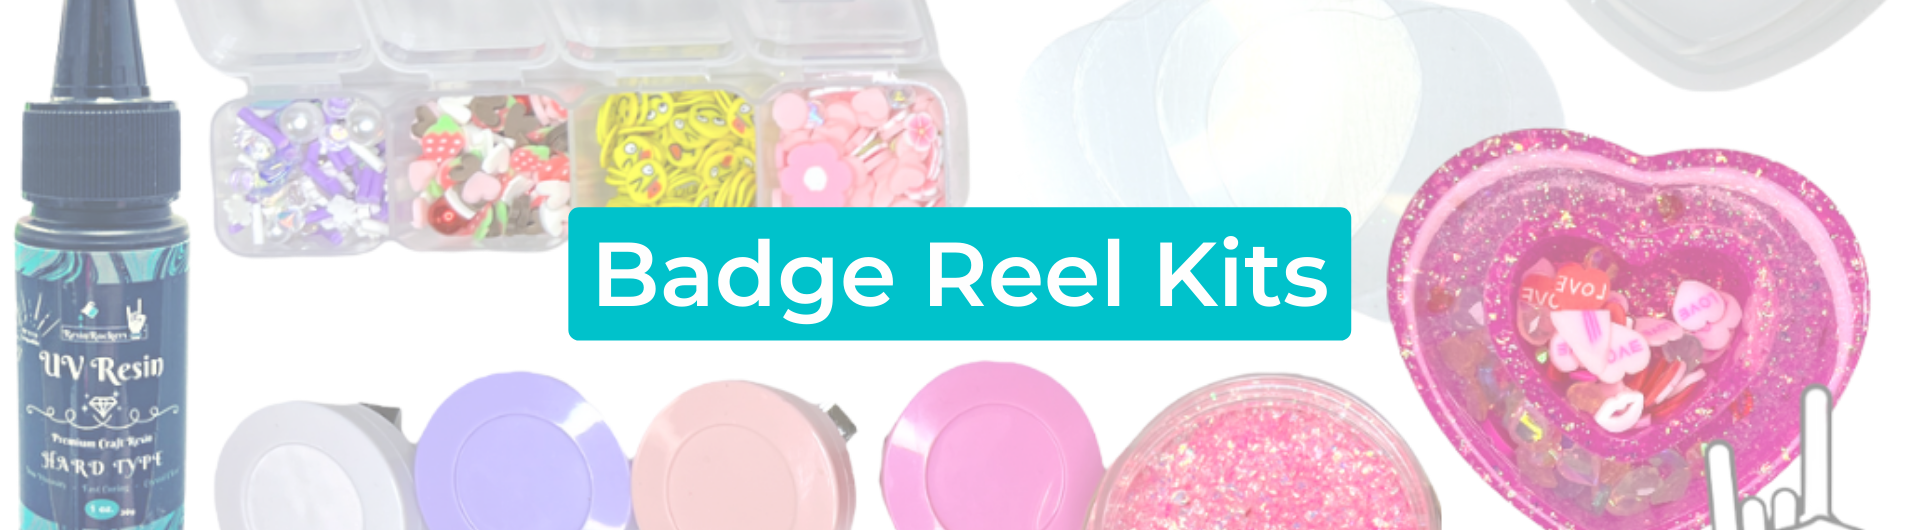 Customize Badge Reel with UV resin and a Cricut